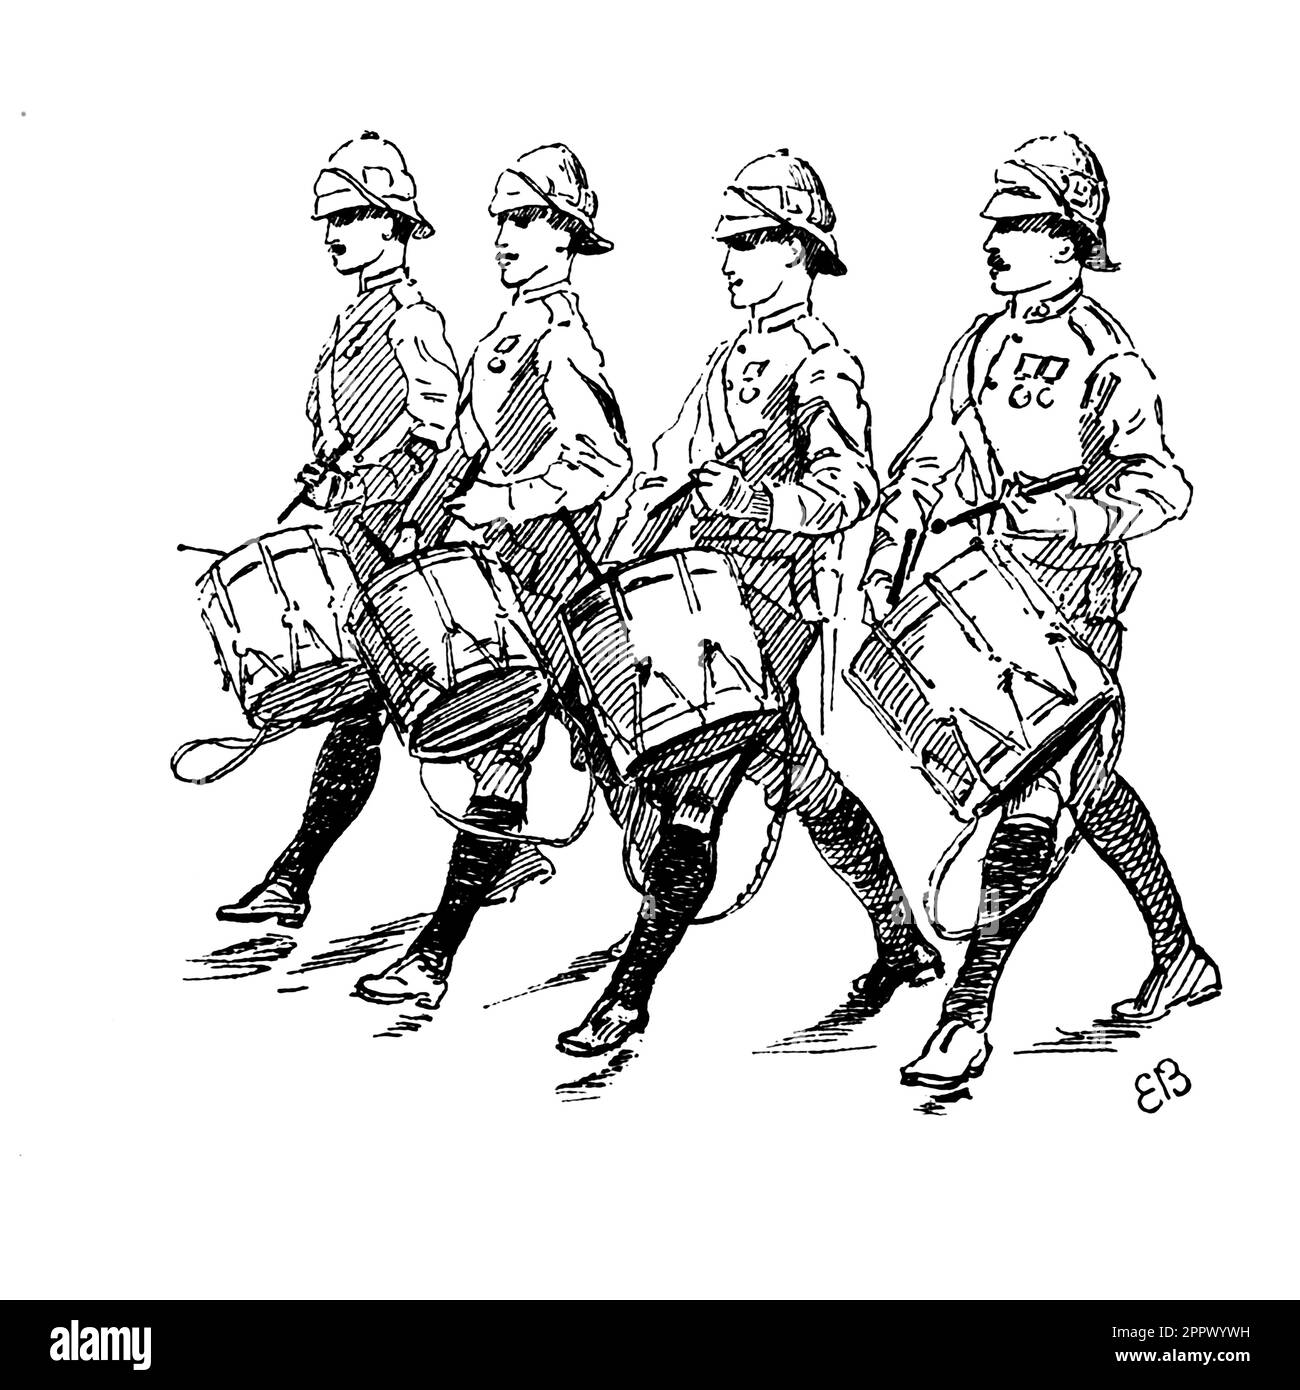 British Soldiers on Parade from the book ' From sketch-book and diary ' by Butler, Elizabeth, Lady, 1846-1933 Publication date 1909 London : Burns & Oates Elizabeth Southerden Thompson (3 November 1846 – 2 October 1933), later known as Lady Butler, was a British painter who specialised in painting scenes from British military campaigns and battles, including the Crimean War and the Napoleonic Wars Stock Photo